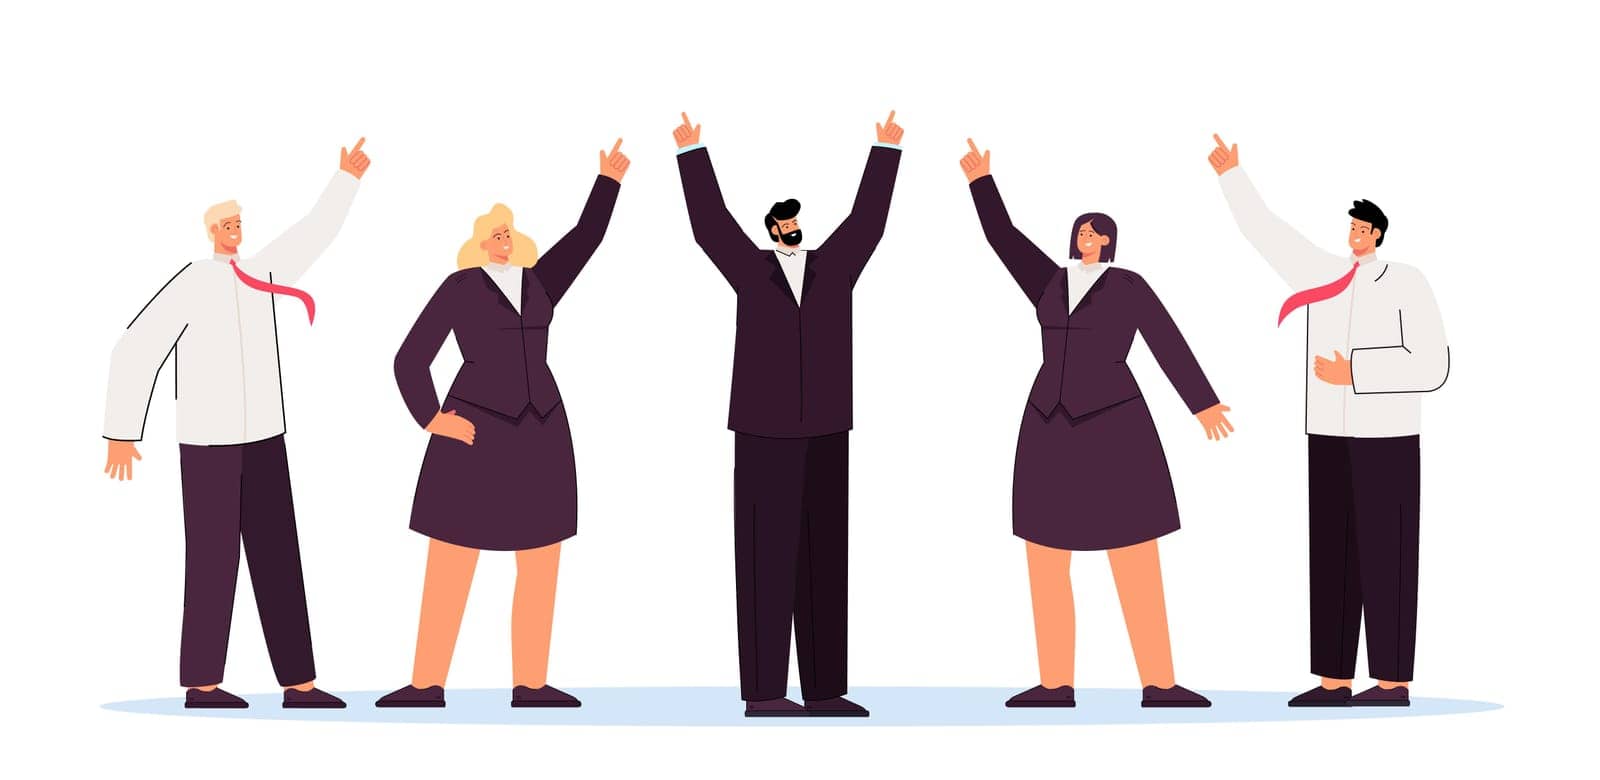 Business team and executive showing upward direction. Flat vector illustration. Group of people in suits achieving goals together, pointing fingers up. Leadership, teamwork, success, job concept